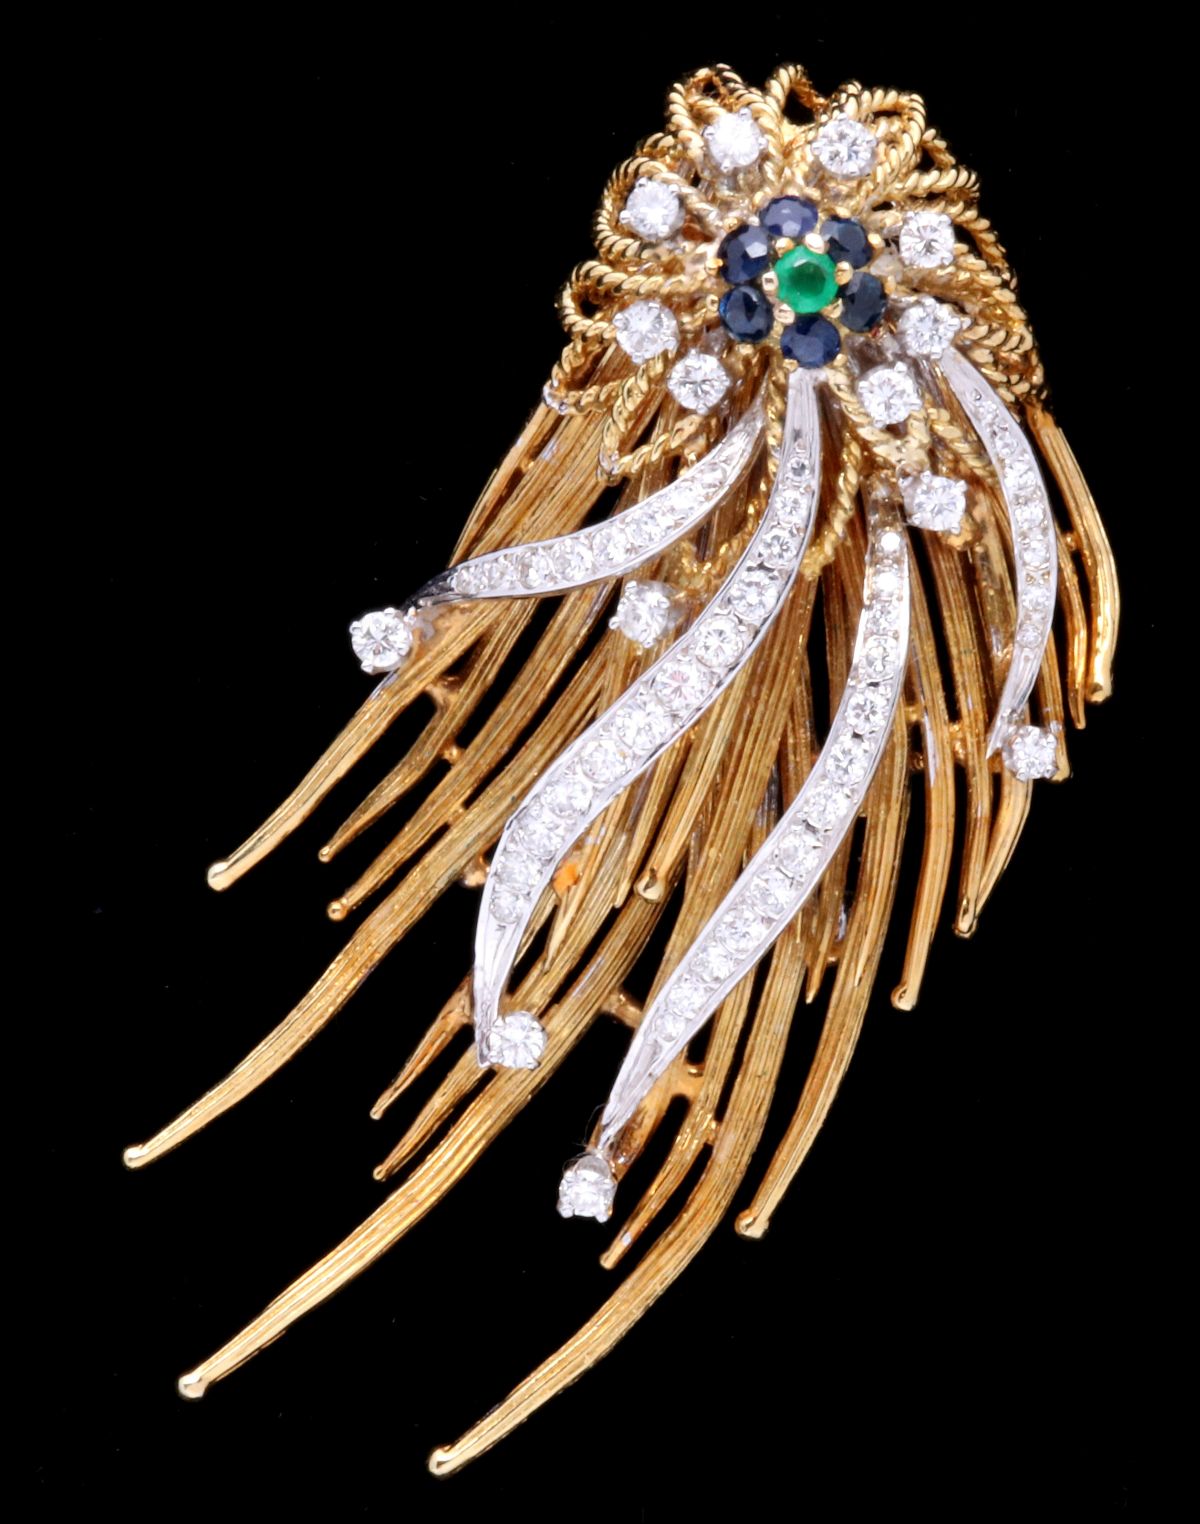 AN 18K GOLD BROOCH WITH COLORED GEMSTONES